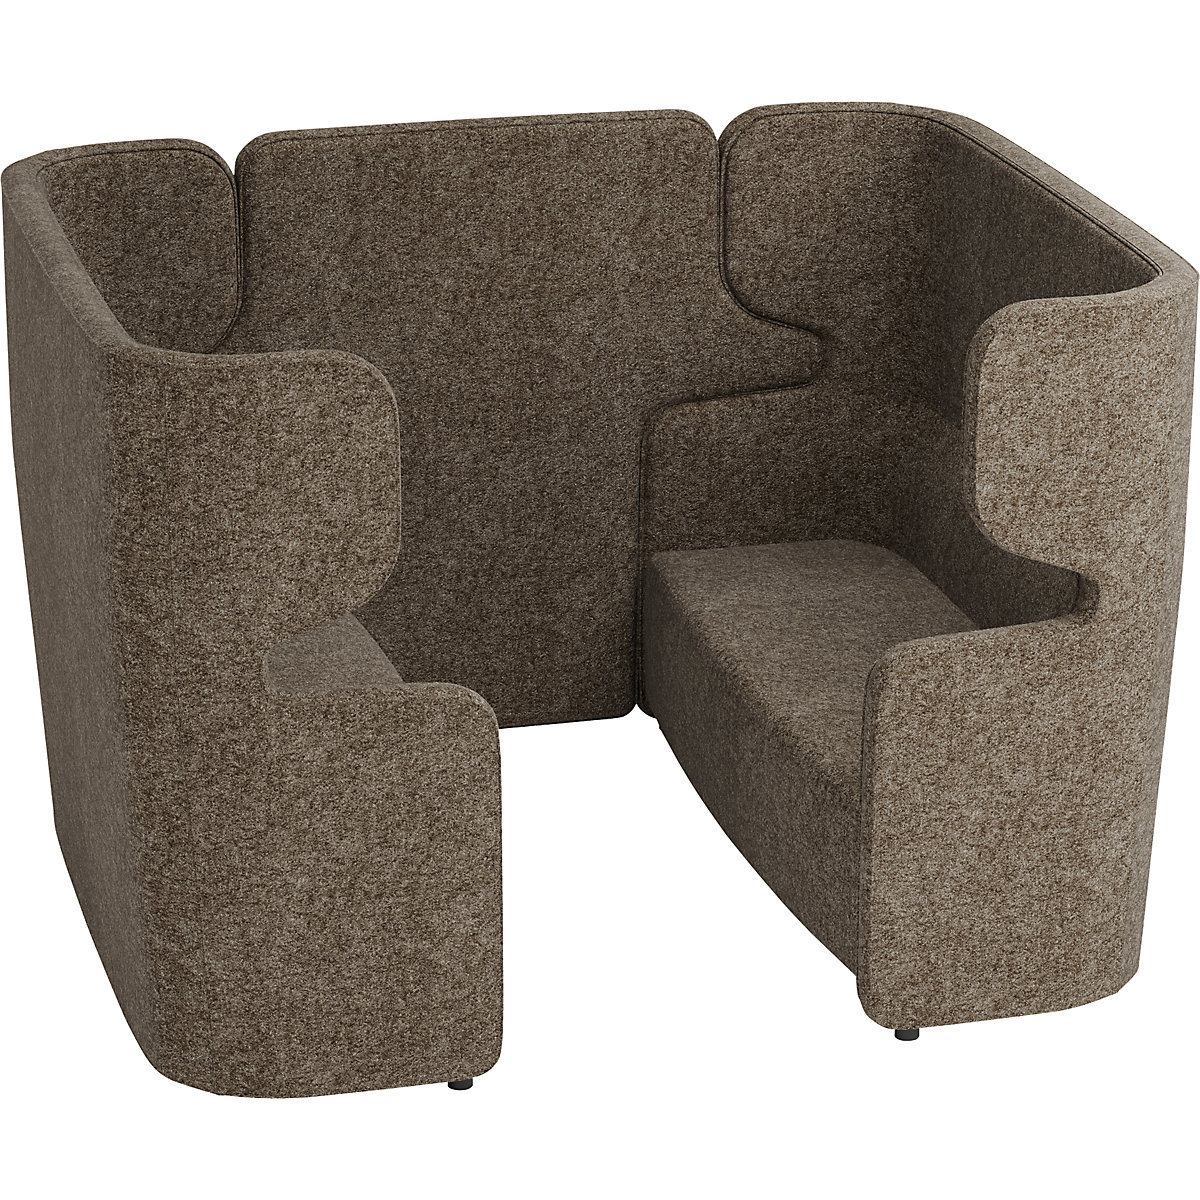 VIVO acoustic sofa – BISLEY, 2 two-seaters with high back rest, centre divider, grey brown